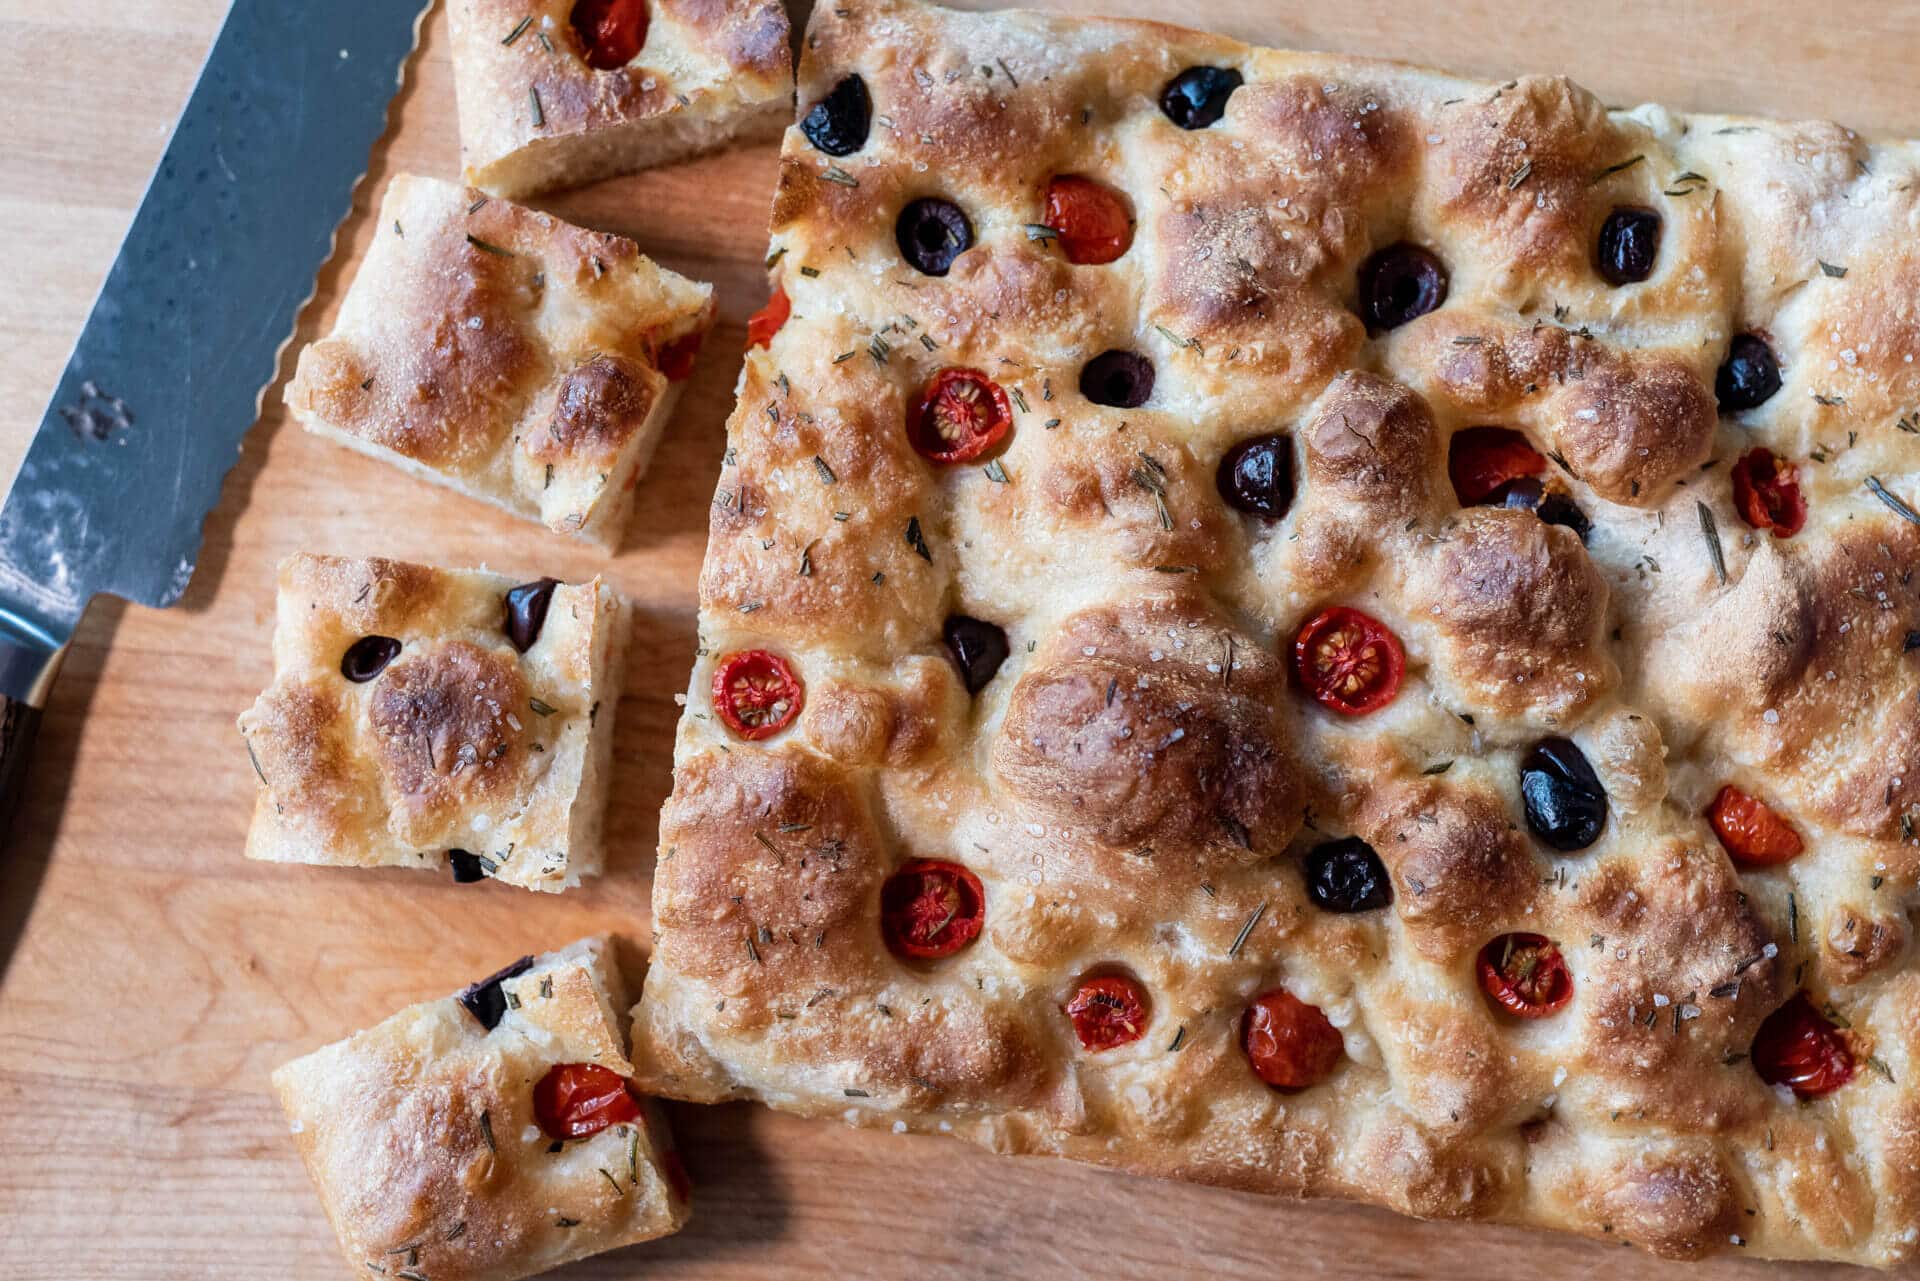 Focaccia with cherry tomatoes and black olives